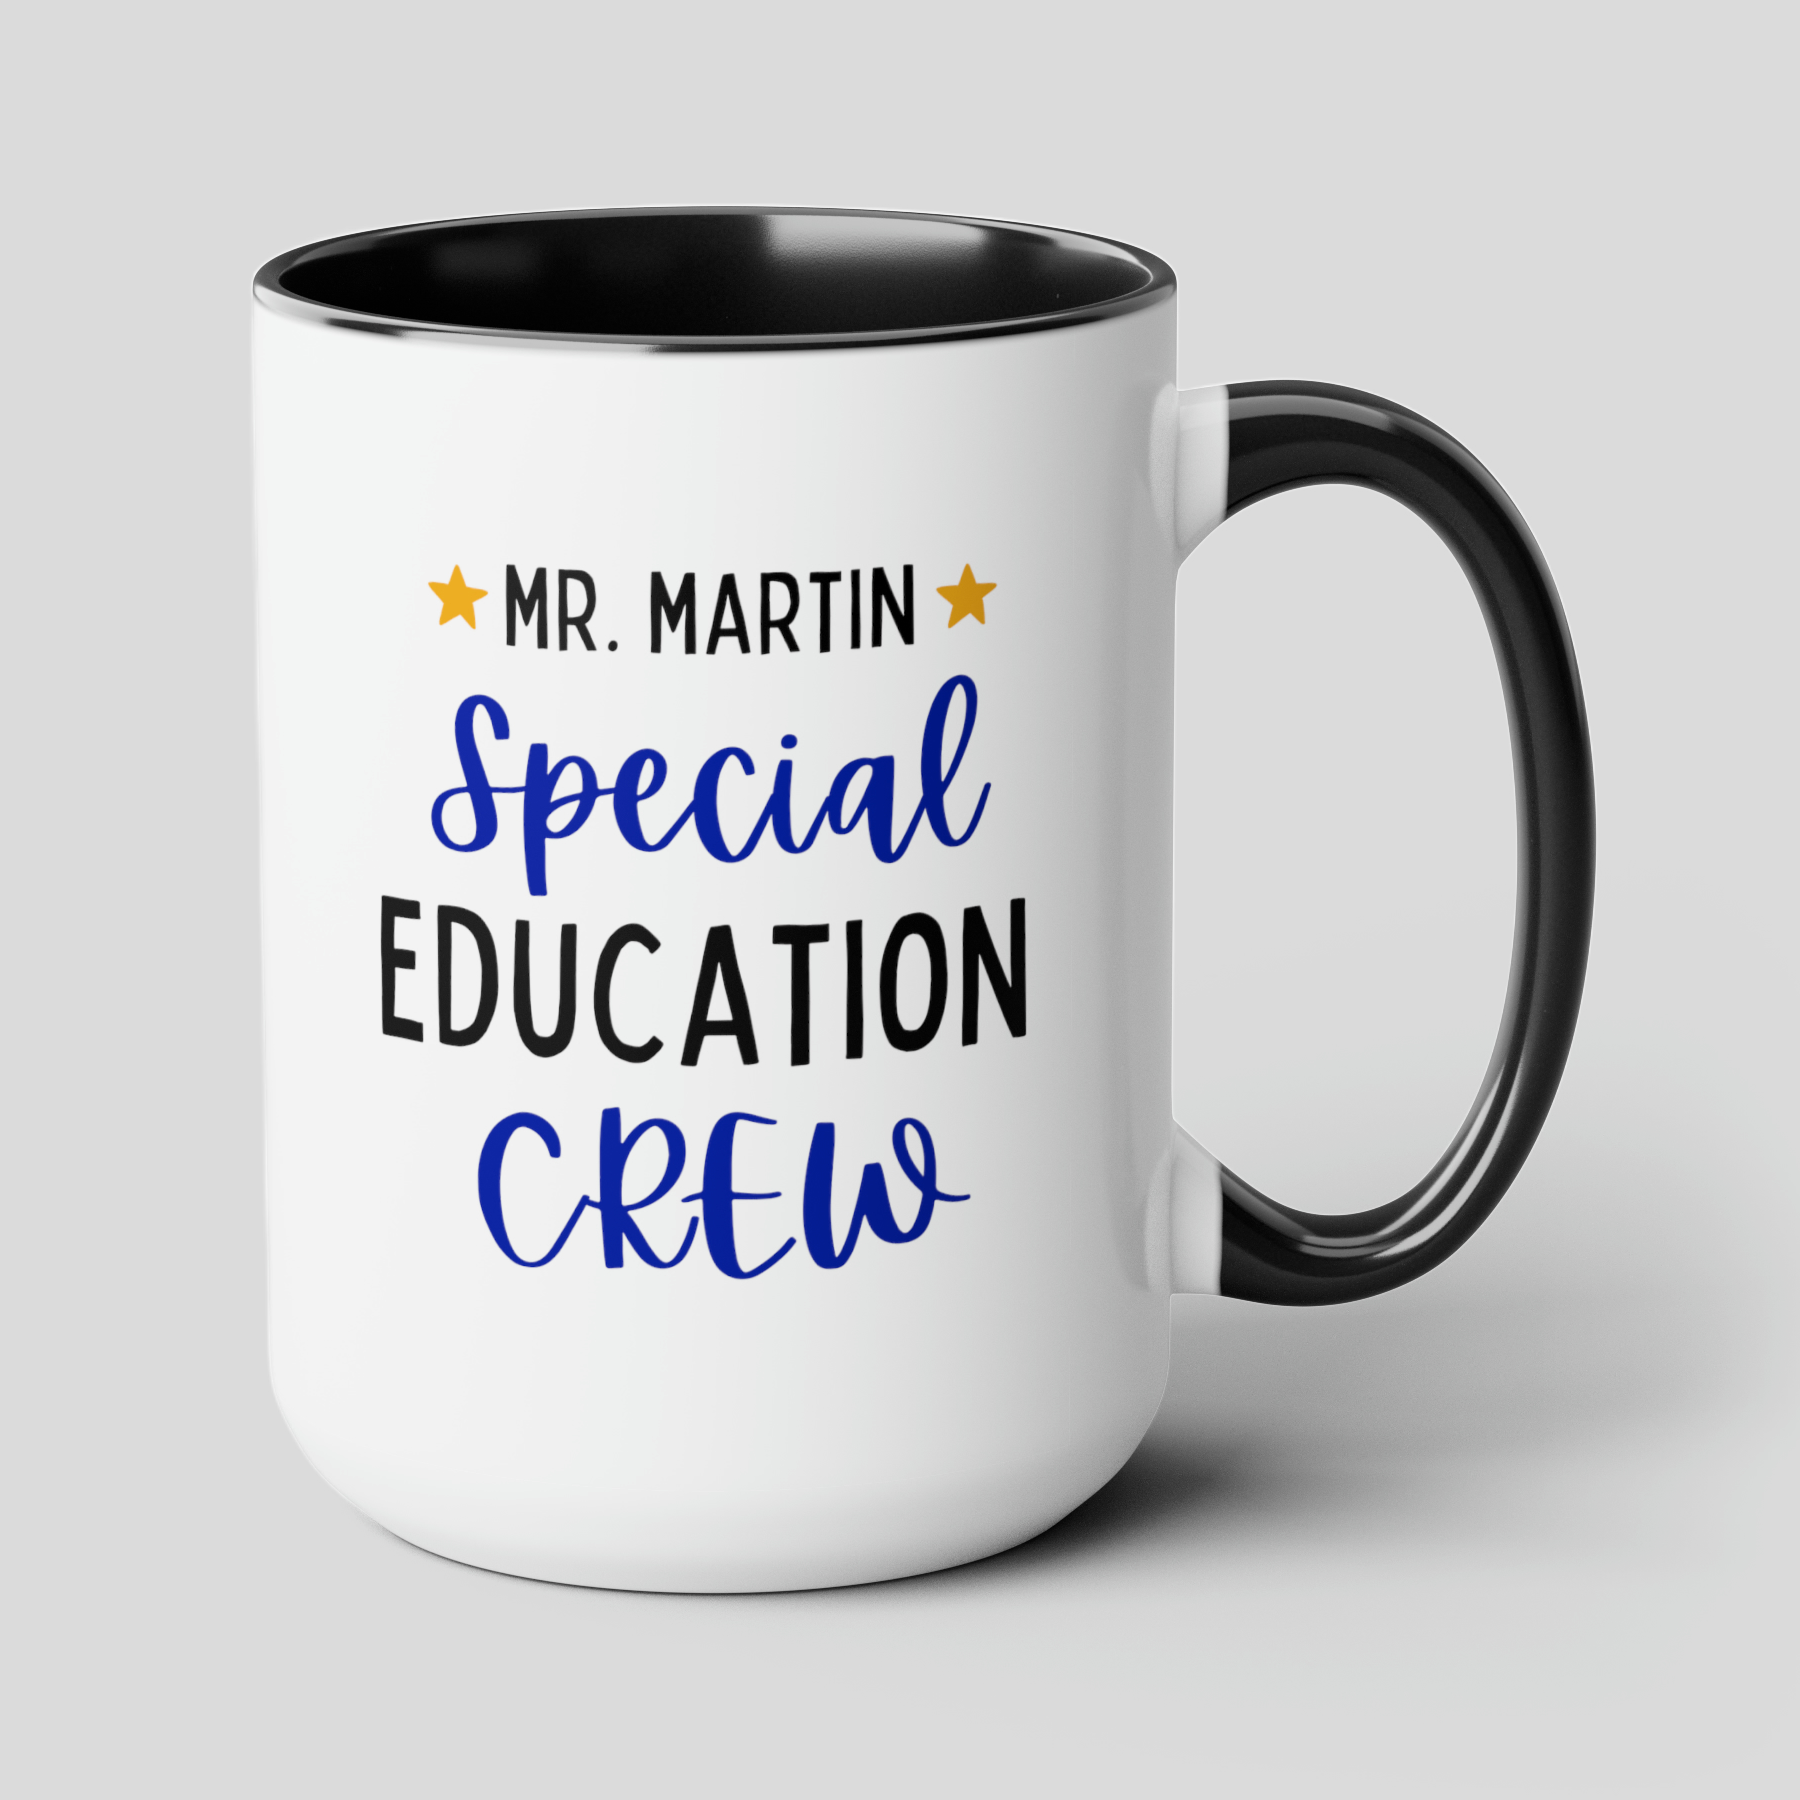 Special Education Crew 15oz white with black accent funny large coffee mug gift for  teacher SPED custom personalized customize name  waveywares wavey wares wavywares wavy wares cover